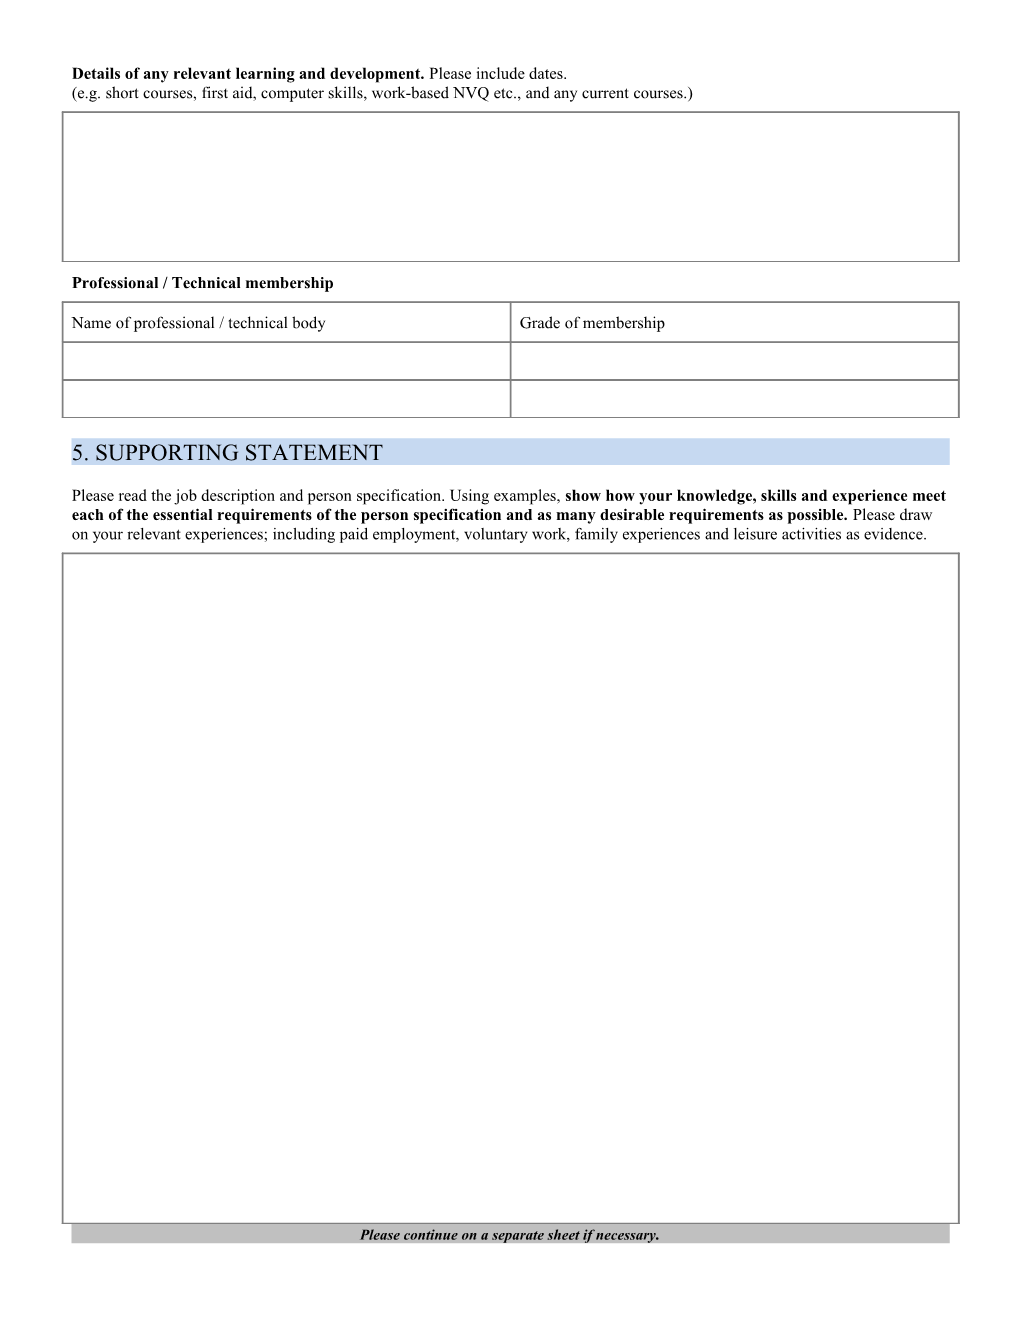 Application for Employment s194